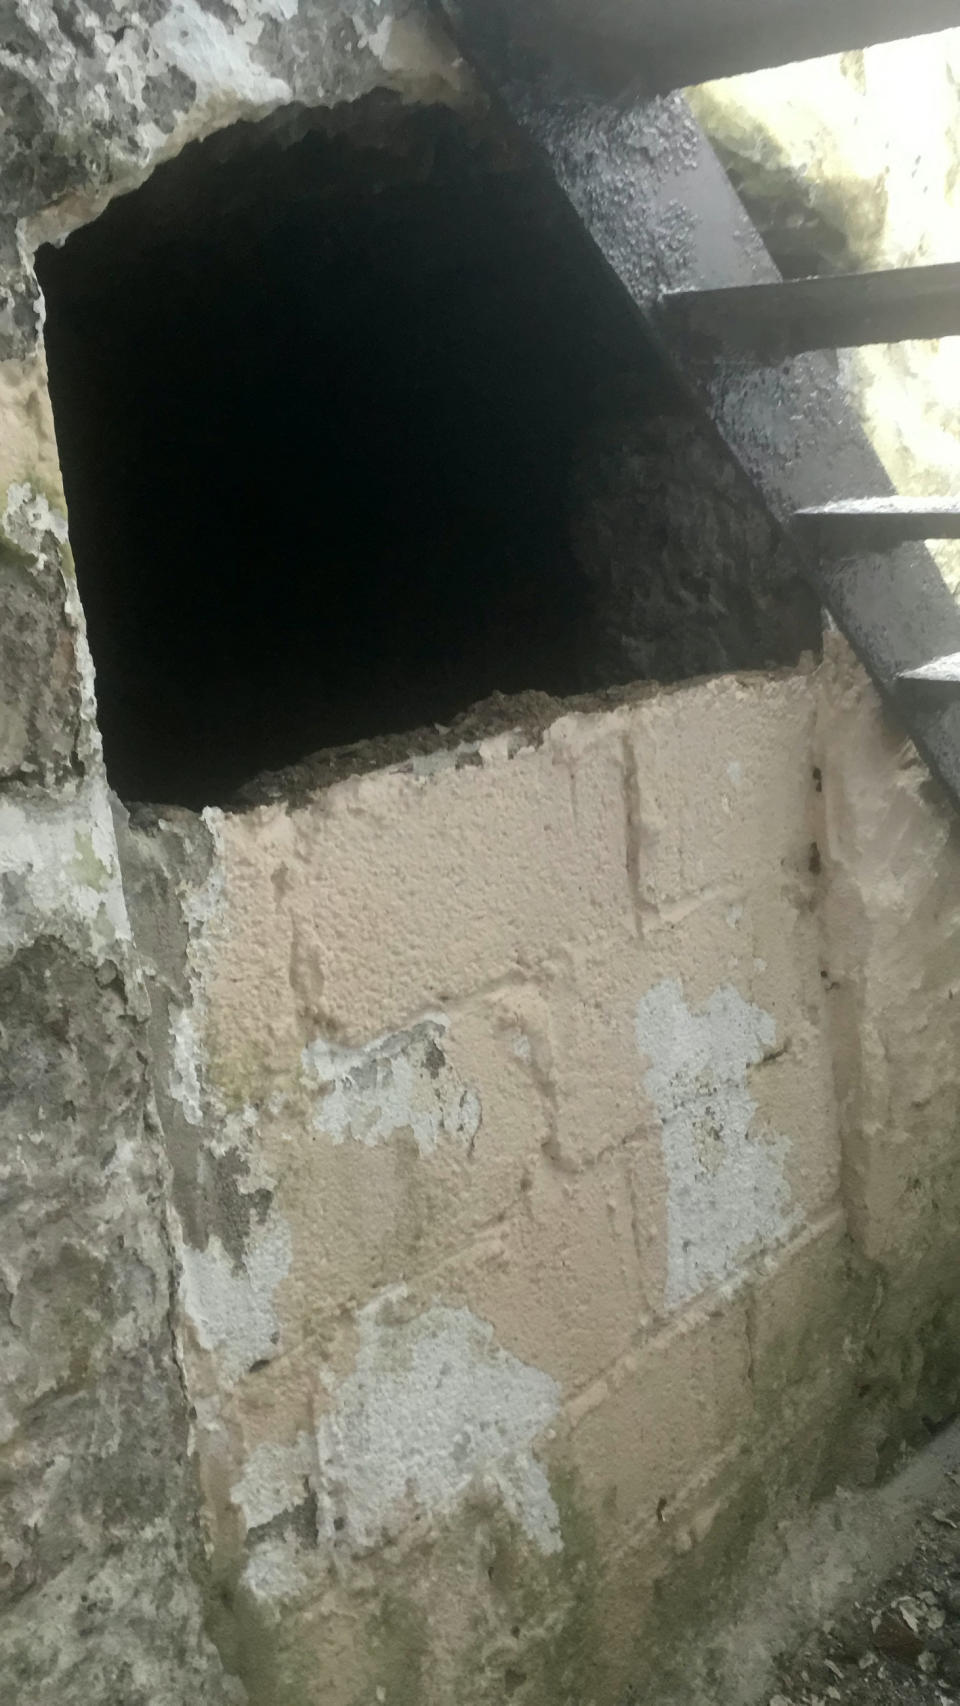 A man found a tunnel behind a wall of his house (SWNS)